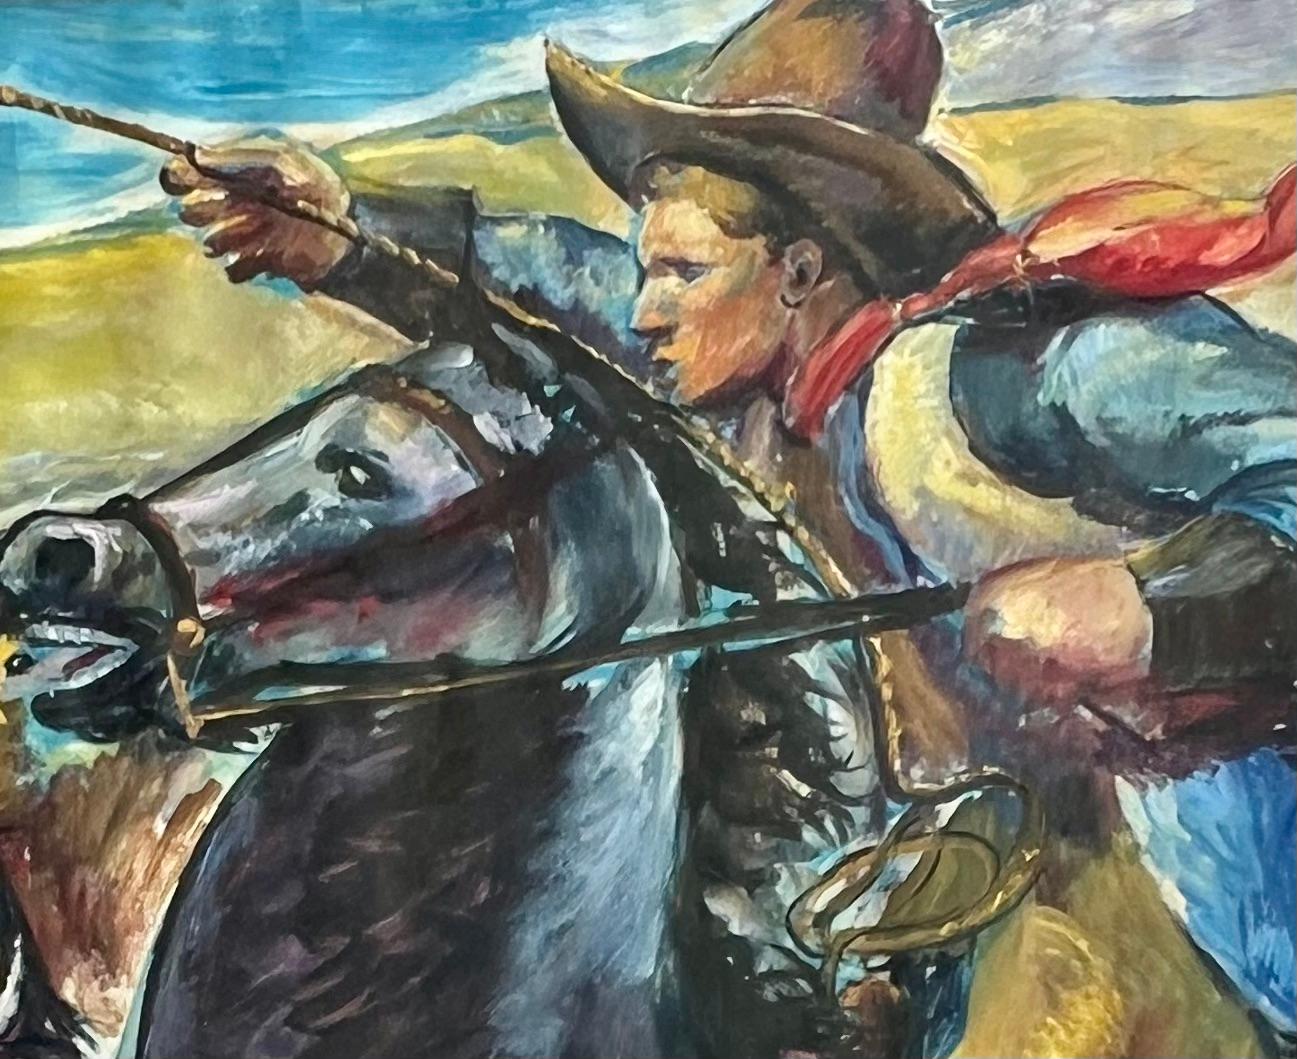 Cowboys Horses Cattle  WPA American Scene Social Realism Mid 20th Century Modern

Jo Cain (1904 – 2003)
Cowboy
33 3/4 x 36 inches
Oil on paper, c. 1930s
Signed lower left
40 x 42 inches framed

Our gallery is pleased to present the exhibition, 